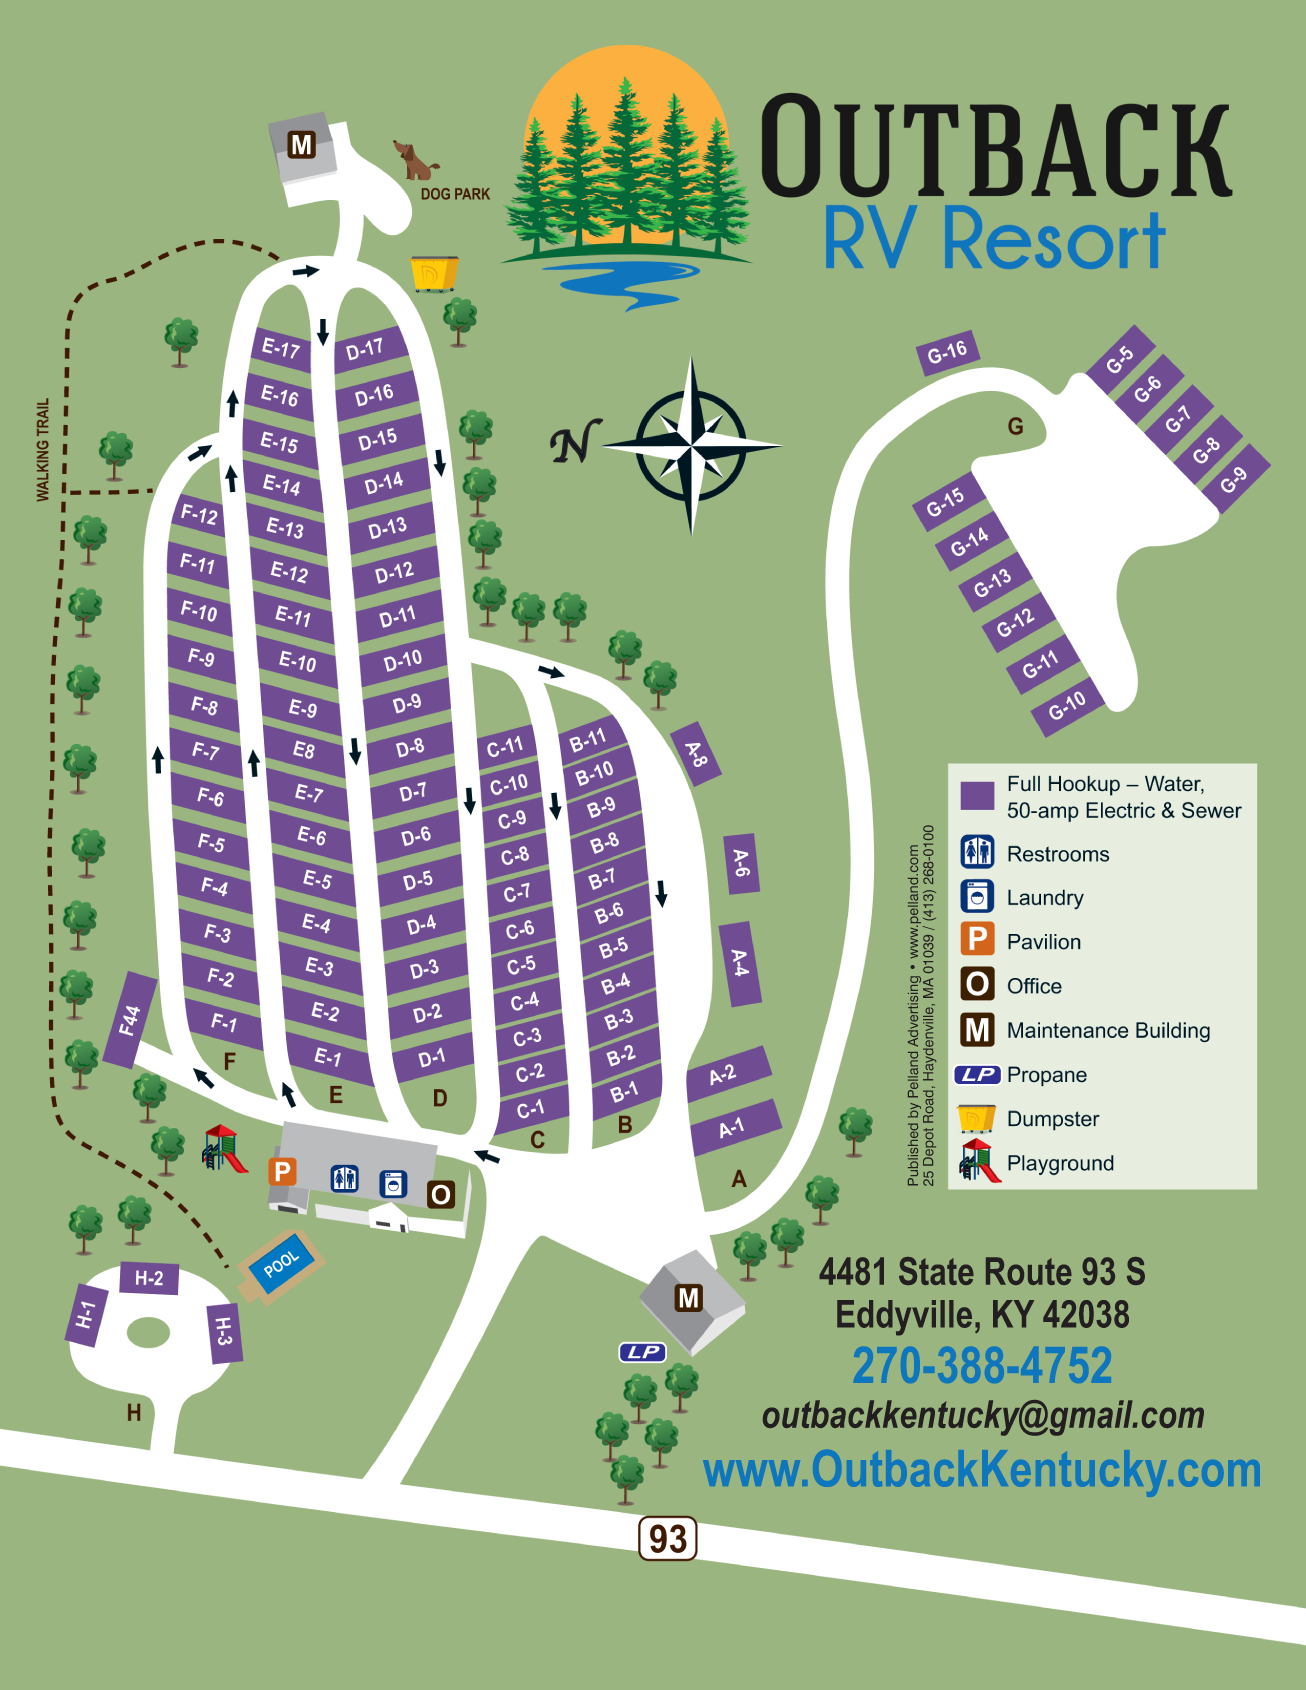 Outback RV Resort Site Map